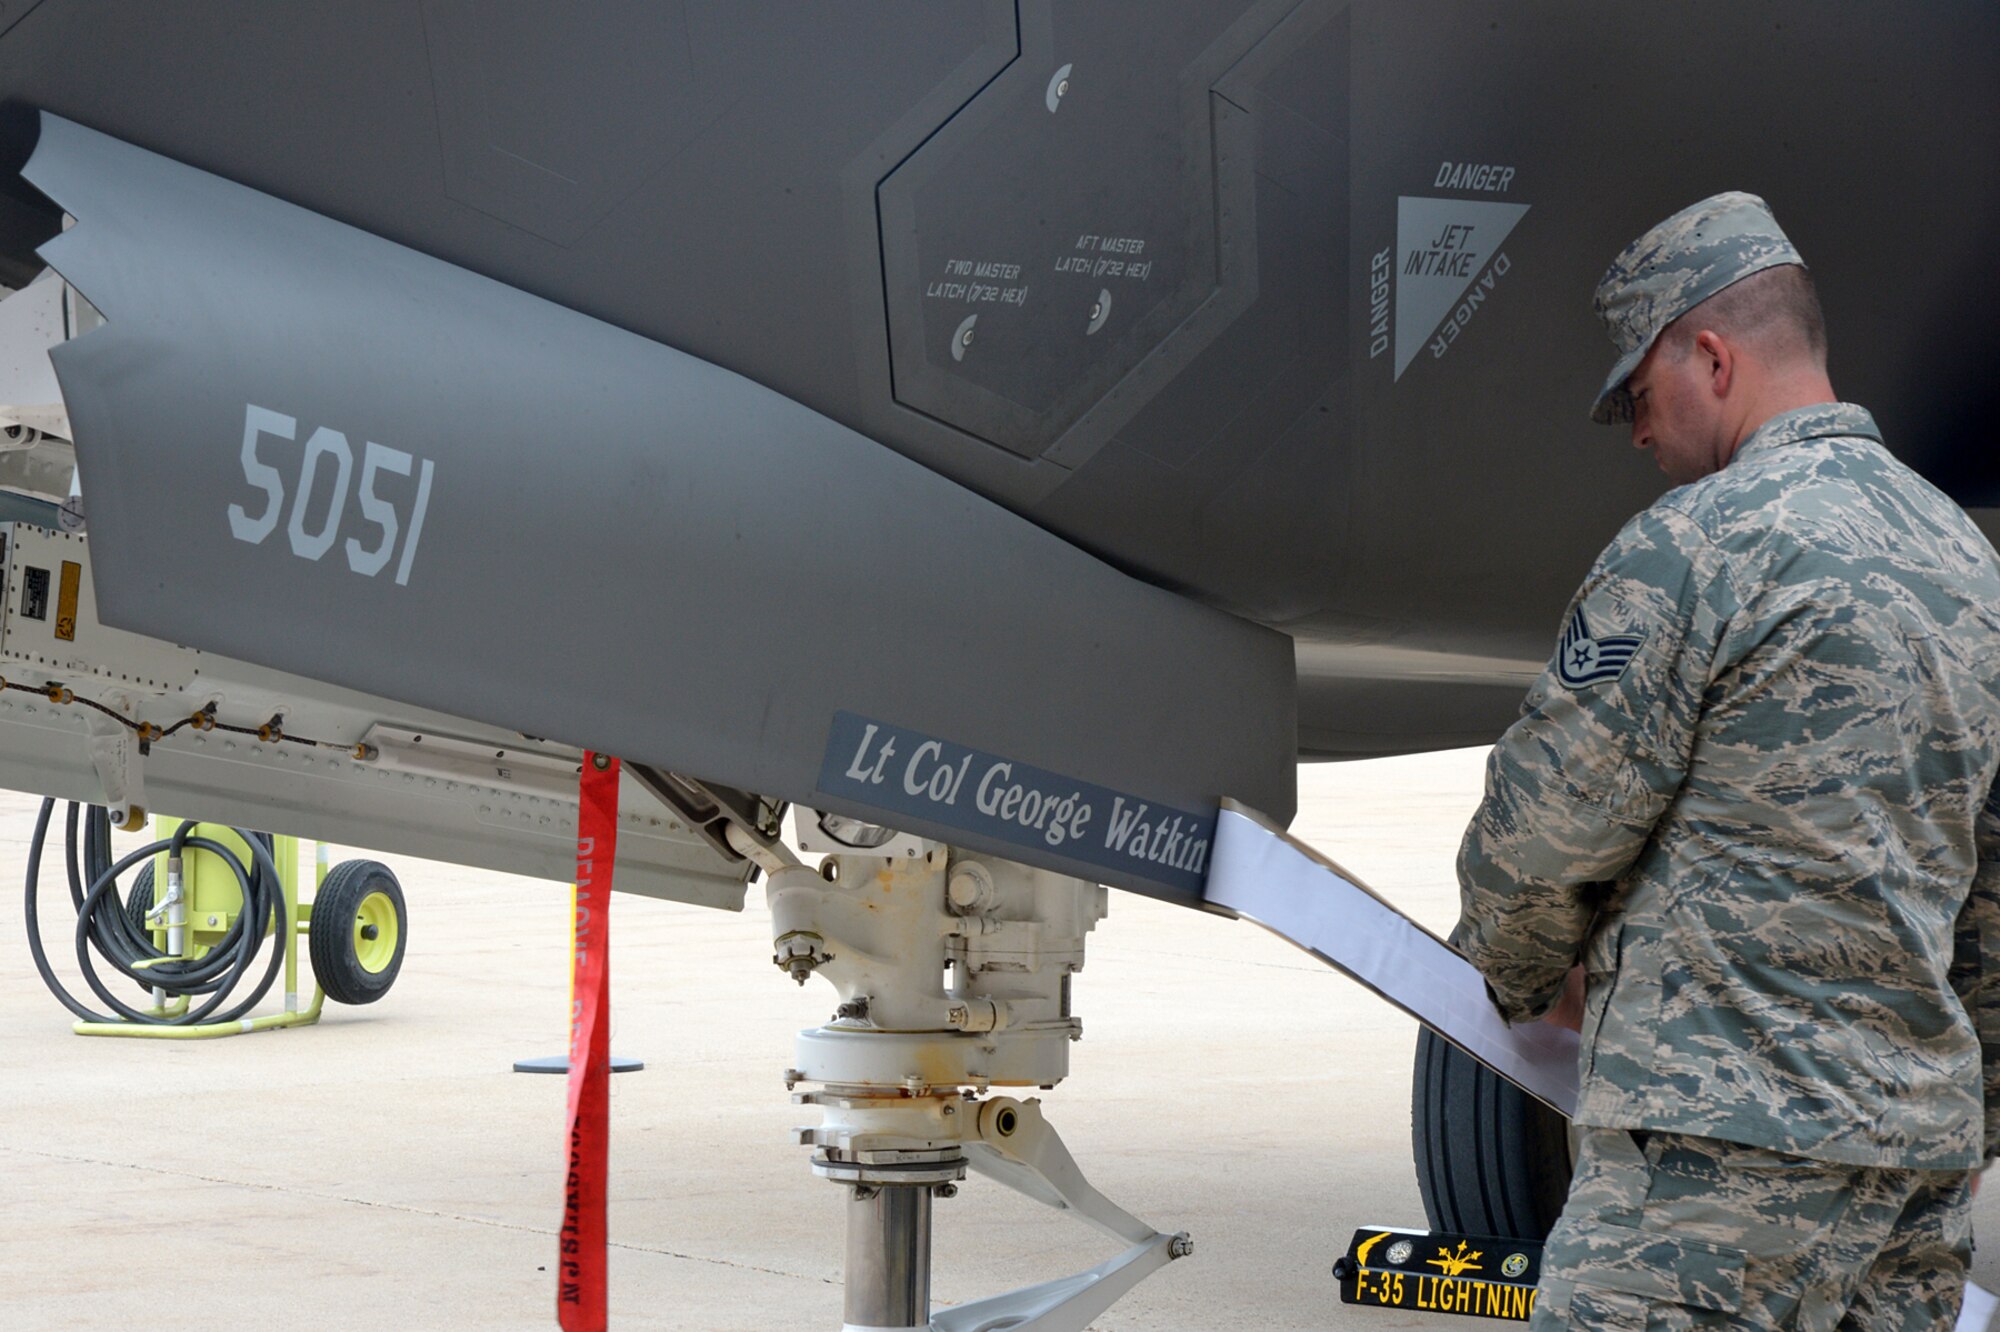 Staff Sgt. Bryan Jernigan, a dedicated crew chief assigned to the 388th Aircraft Maintenance Squadron, reveals the name on an F-35A aircraft of the 34th Fighter Squadron's new commander, Lt. Col. George R. Watkins,  during the squadron’s activation ceremony July 17 at Hill Air Force Base, Utah. The 34th will be the first combat squadron to fly the Air Force’s newest fighter aircraft, the F-35A. The squadron has an extremely rich history. After many contributions in major U.S. conflicts, the 34th was relocated to Hill AFB on Dec. 8, 1975, where they became the first fighter squadron to receive the F-16 fighter aircraft. The squadron’s first F-35A will arrive in September.  (U.S. Air Force photo by Alex R. Lloyd/Released)